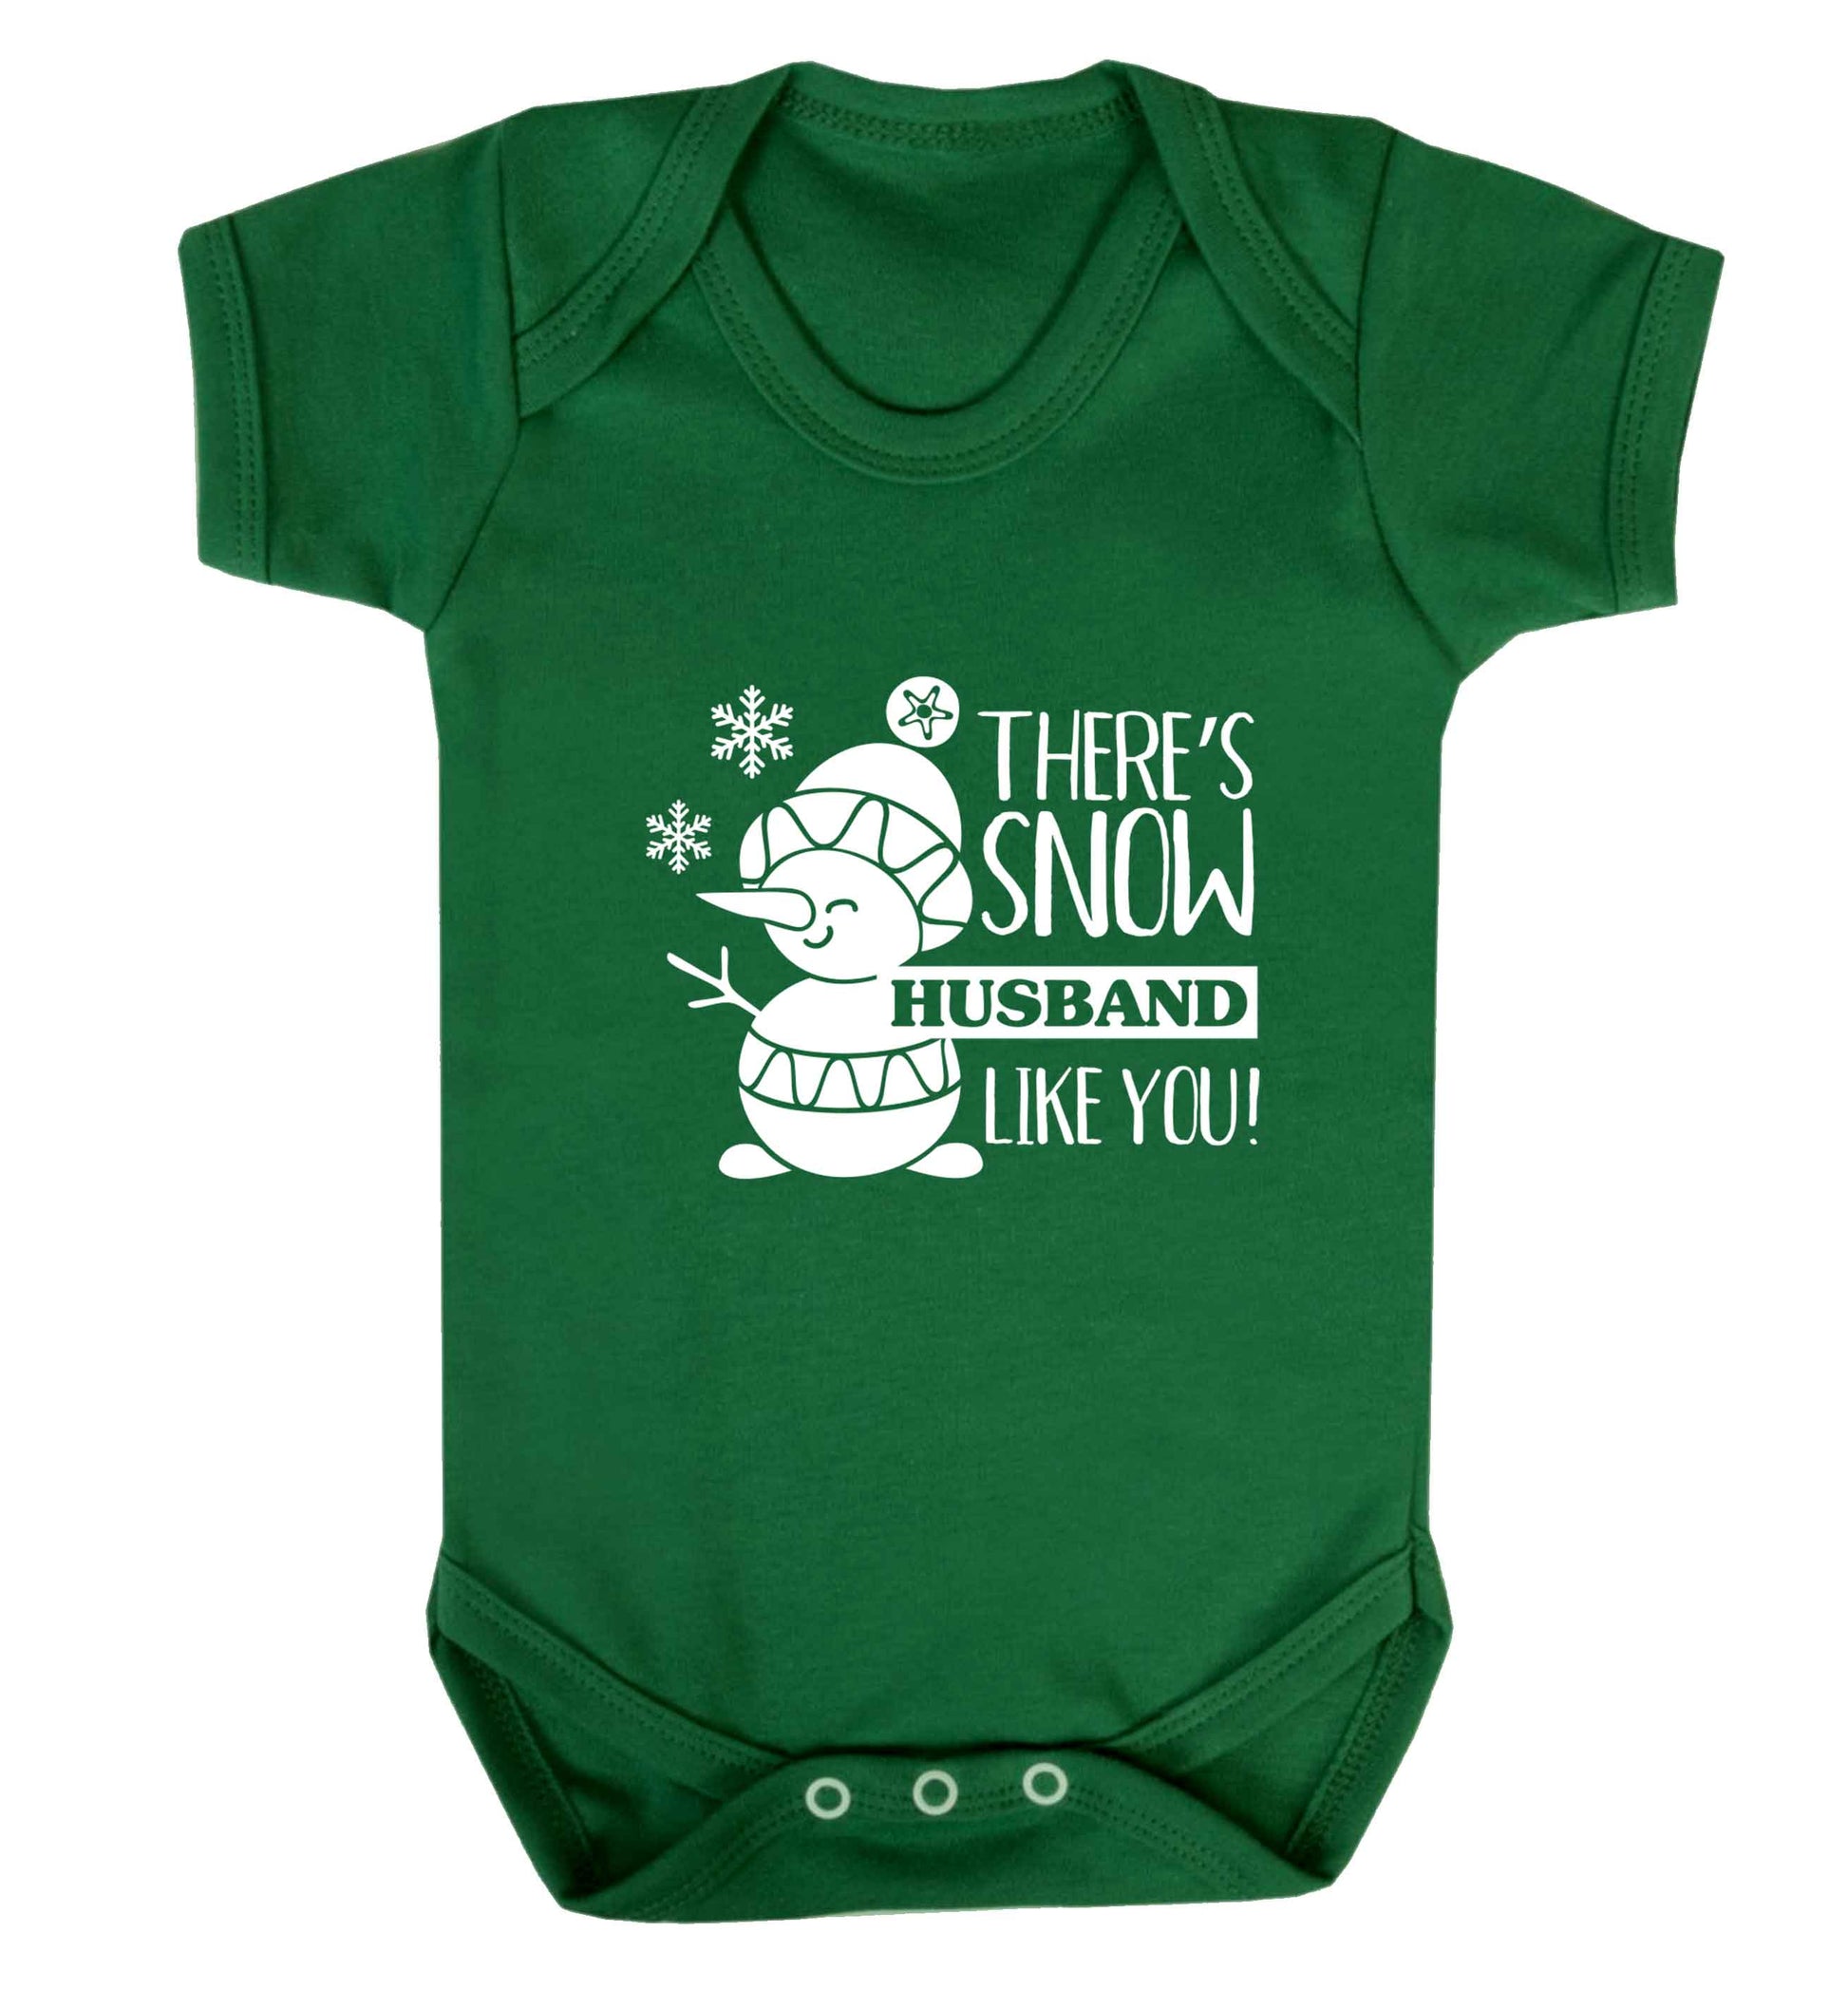 There's snow husband like you baby vest green 18-24 months